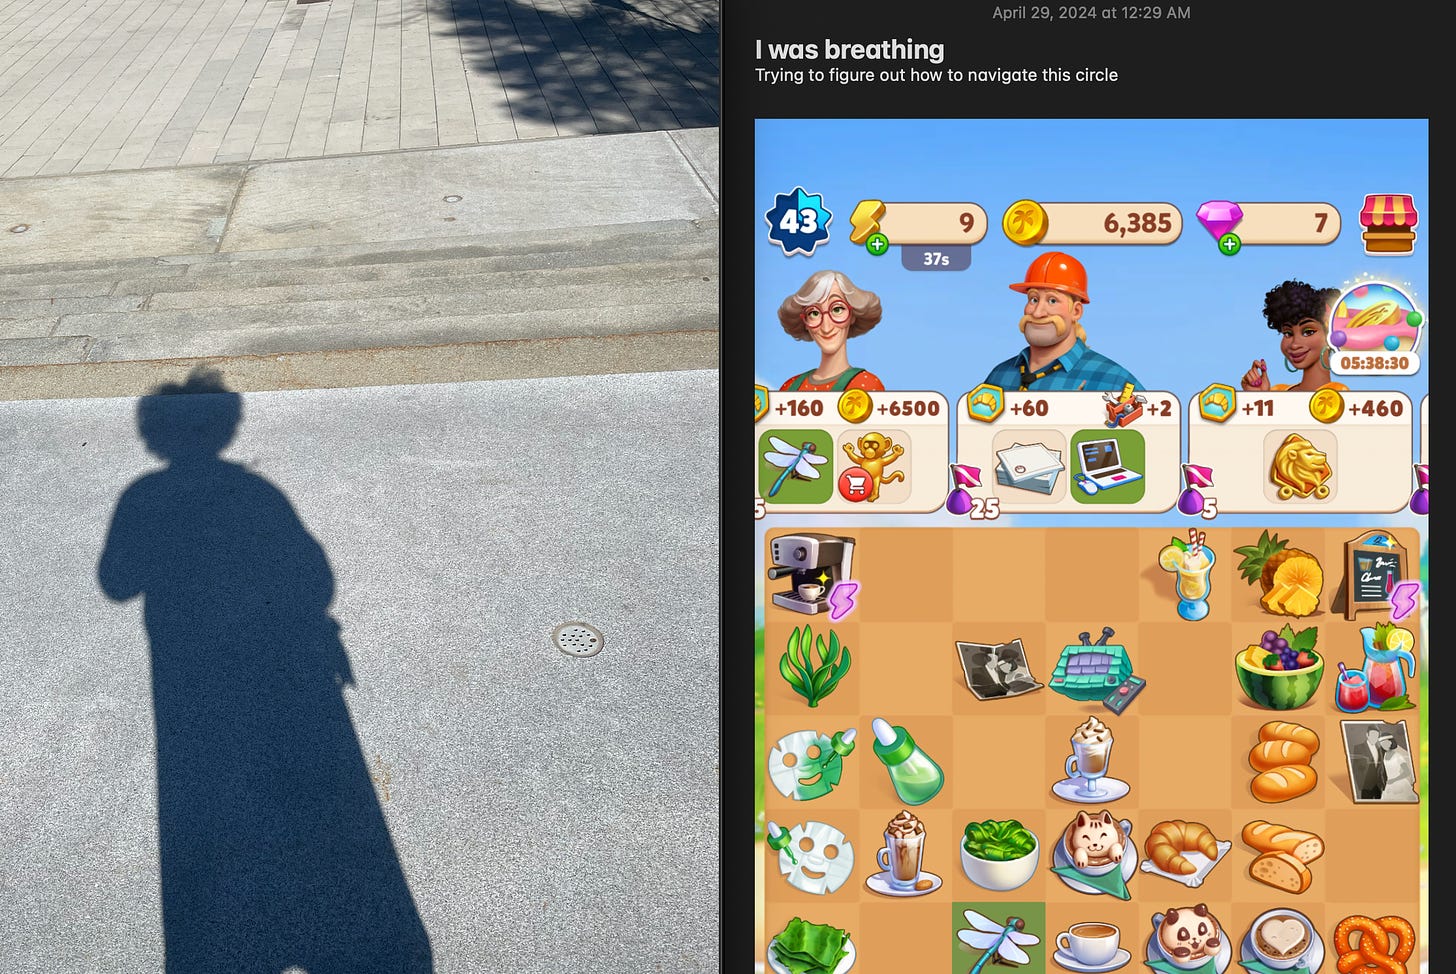 A split screen image, on the left the shadow cast by my body onto the gray pavement on a sunny day. On the right, some text "i was breathing, trying to figure out how to navigate this circle." Under it, a screenshot of a merge digital game called travel town.